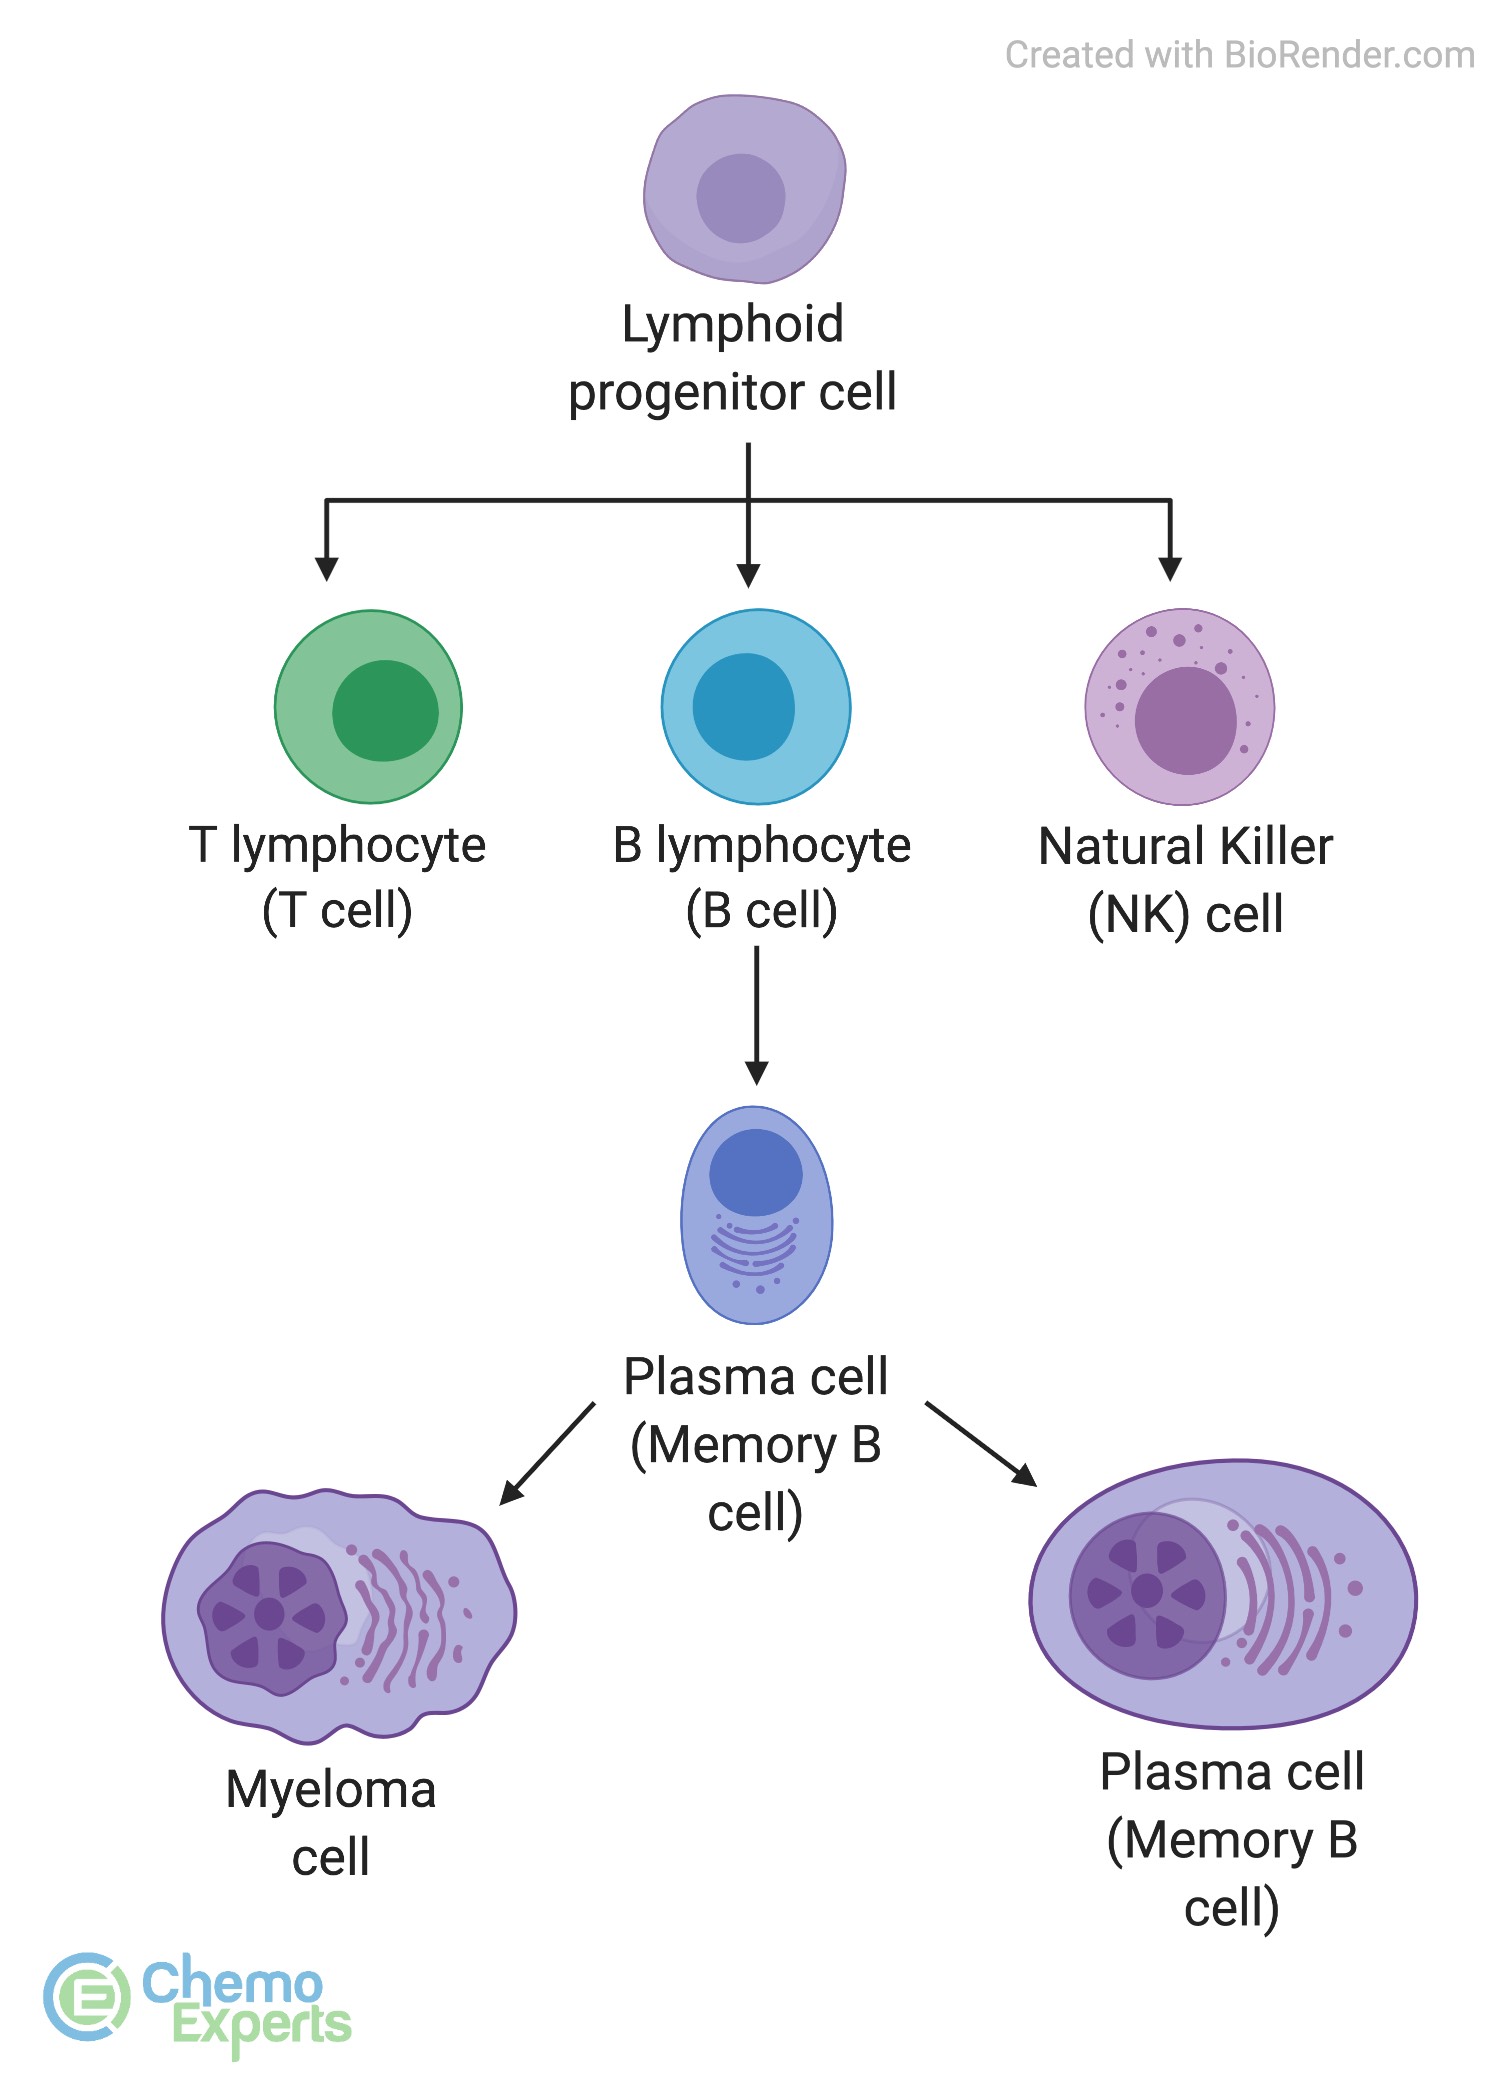 What cell type does multiple myeloma come from and what does it look like?